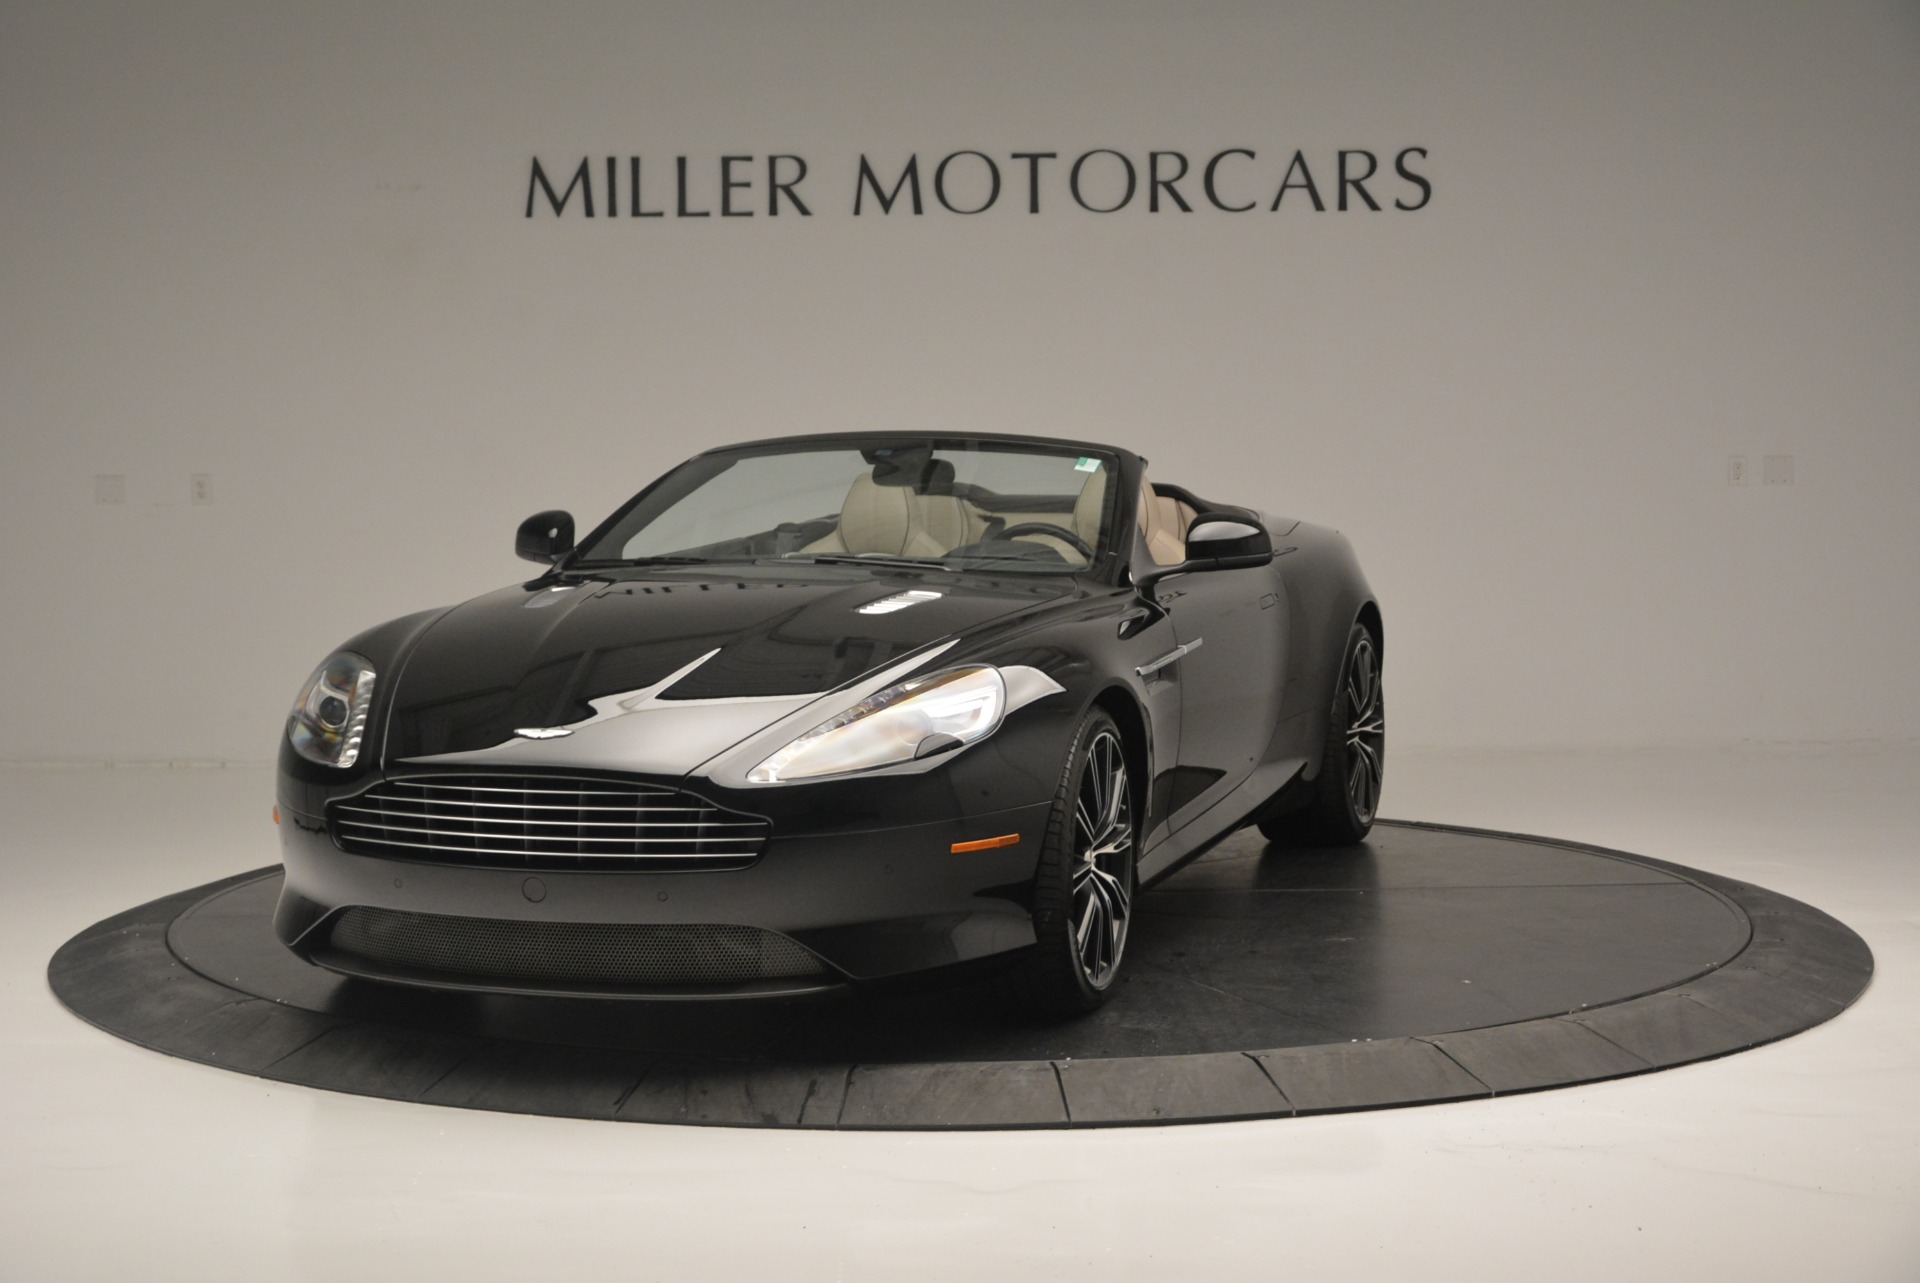 Used 2015 Aston Martin DB9 Volante for sale Sold at Pagani of Greenwich in Greenwich CT 06830 1